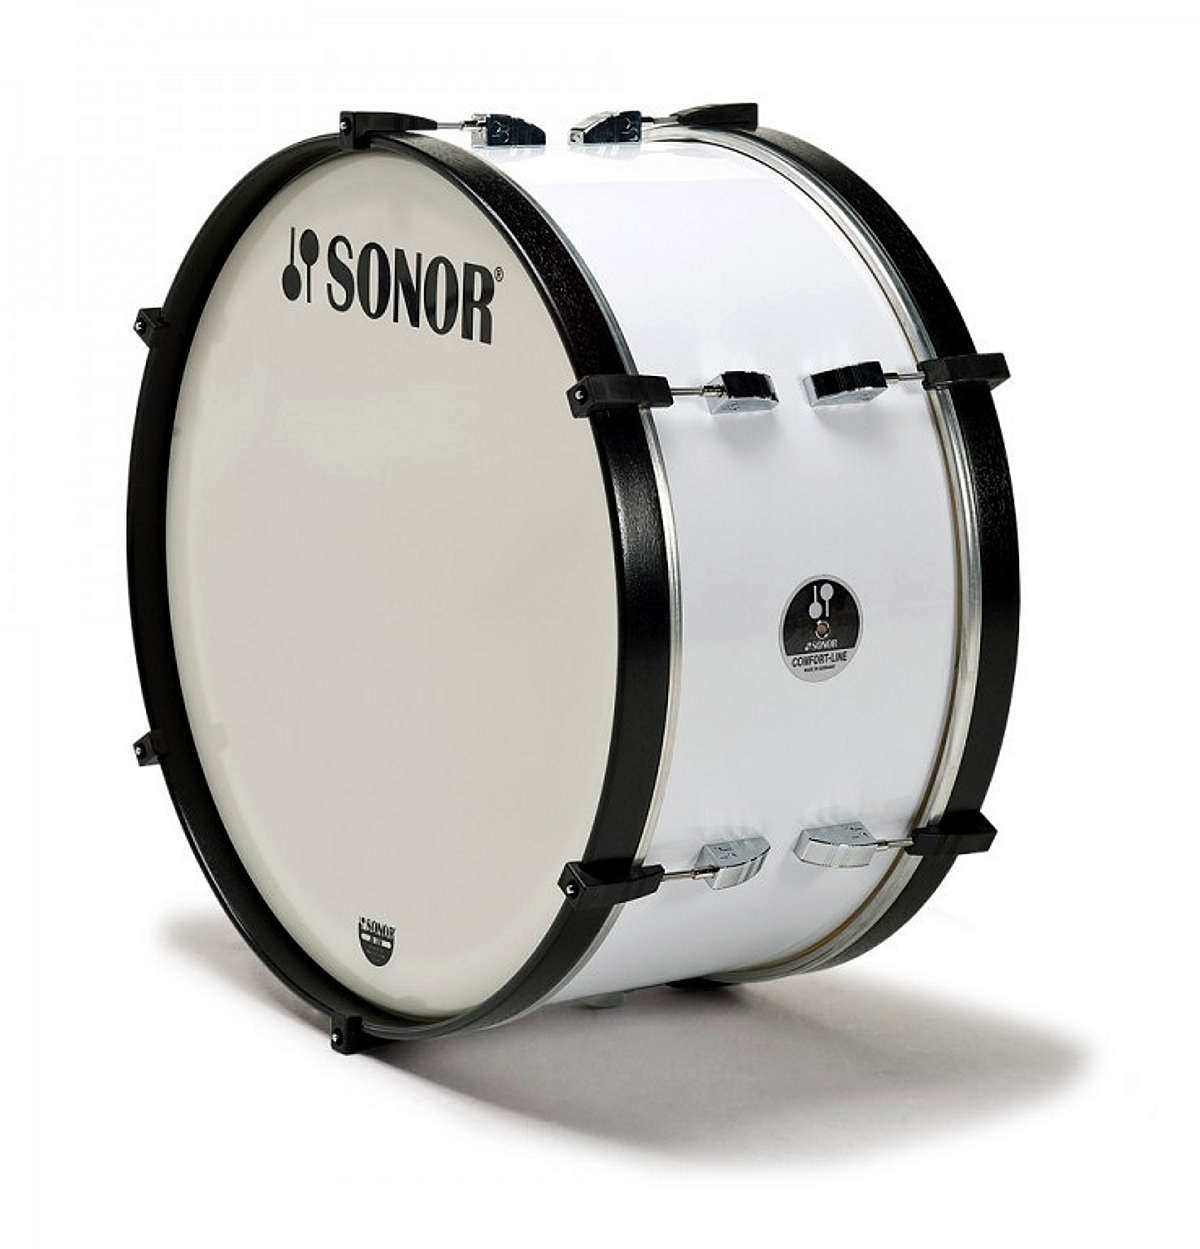 Sonor MC 2614 CW Marching Bass Drum